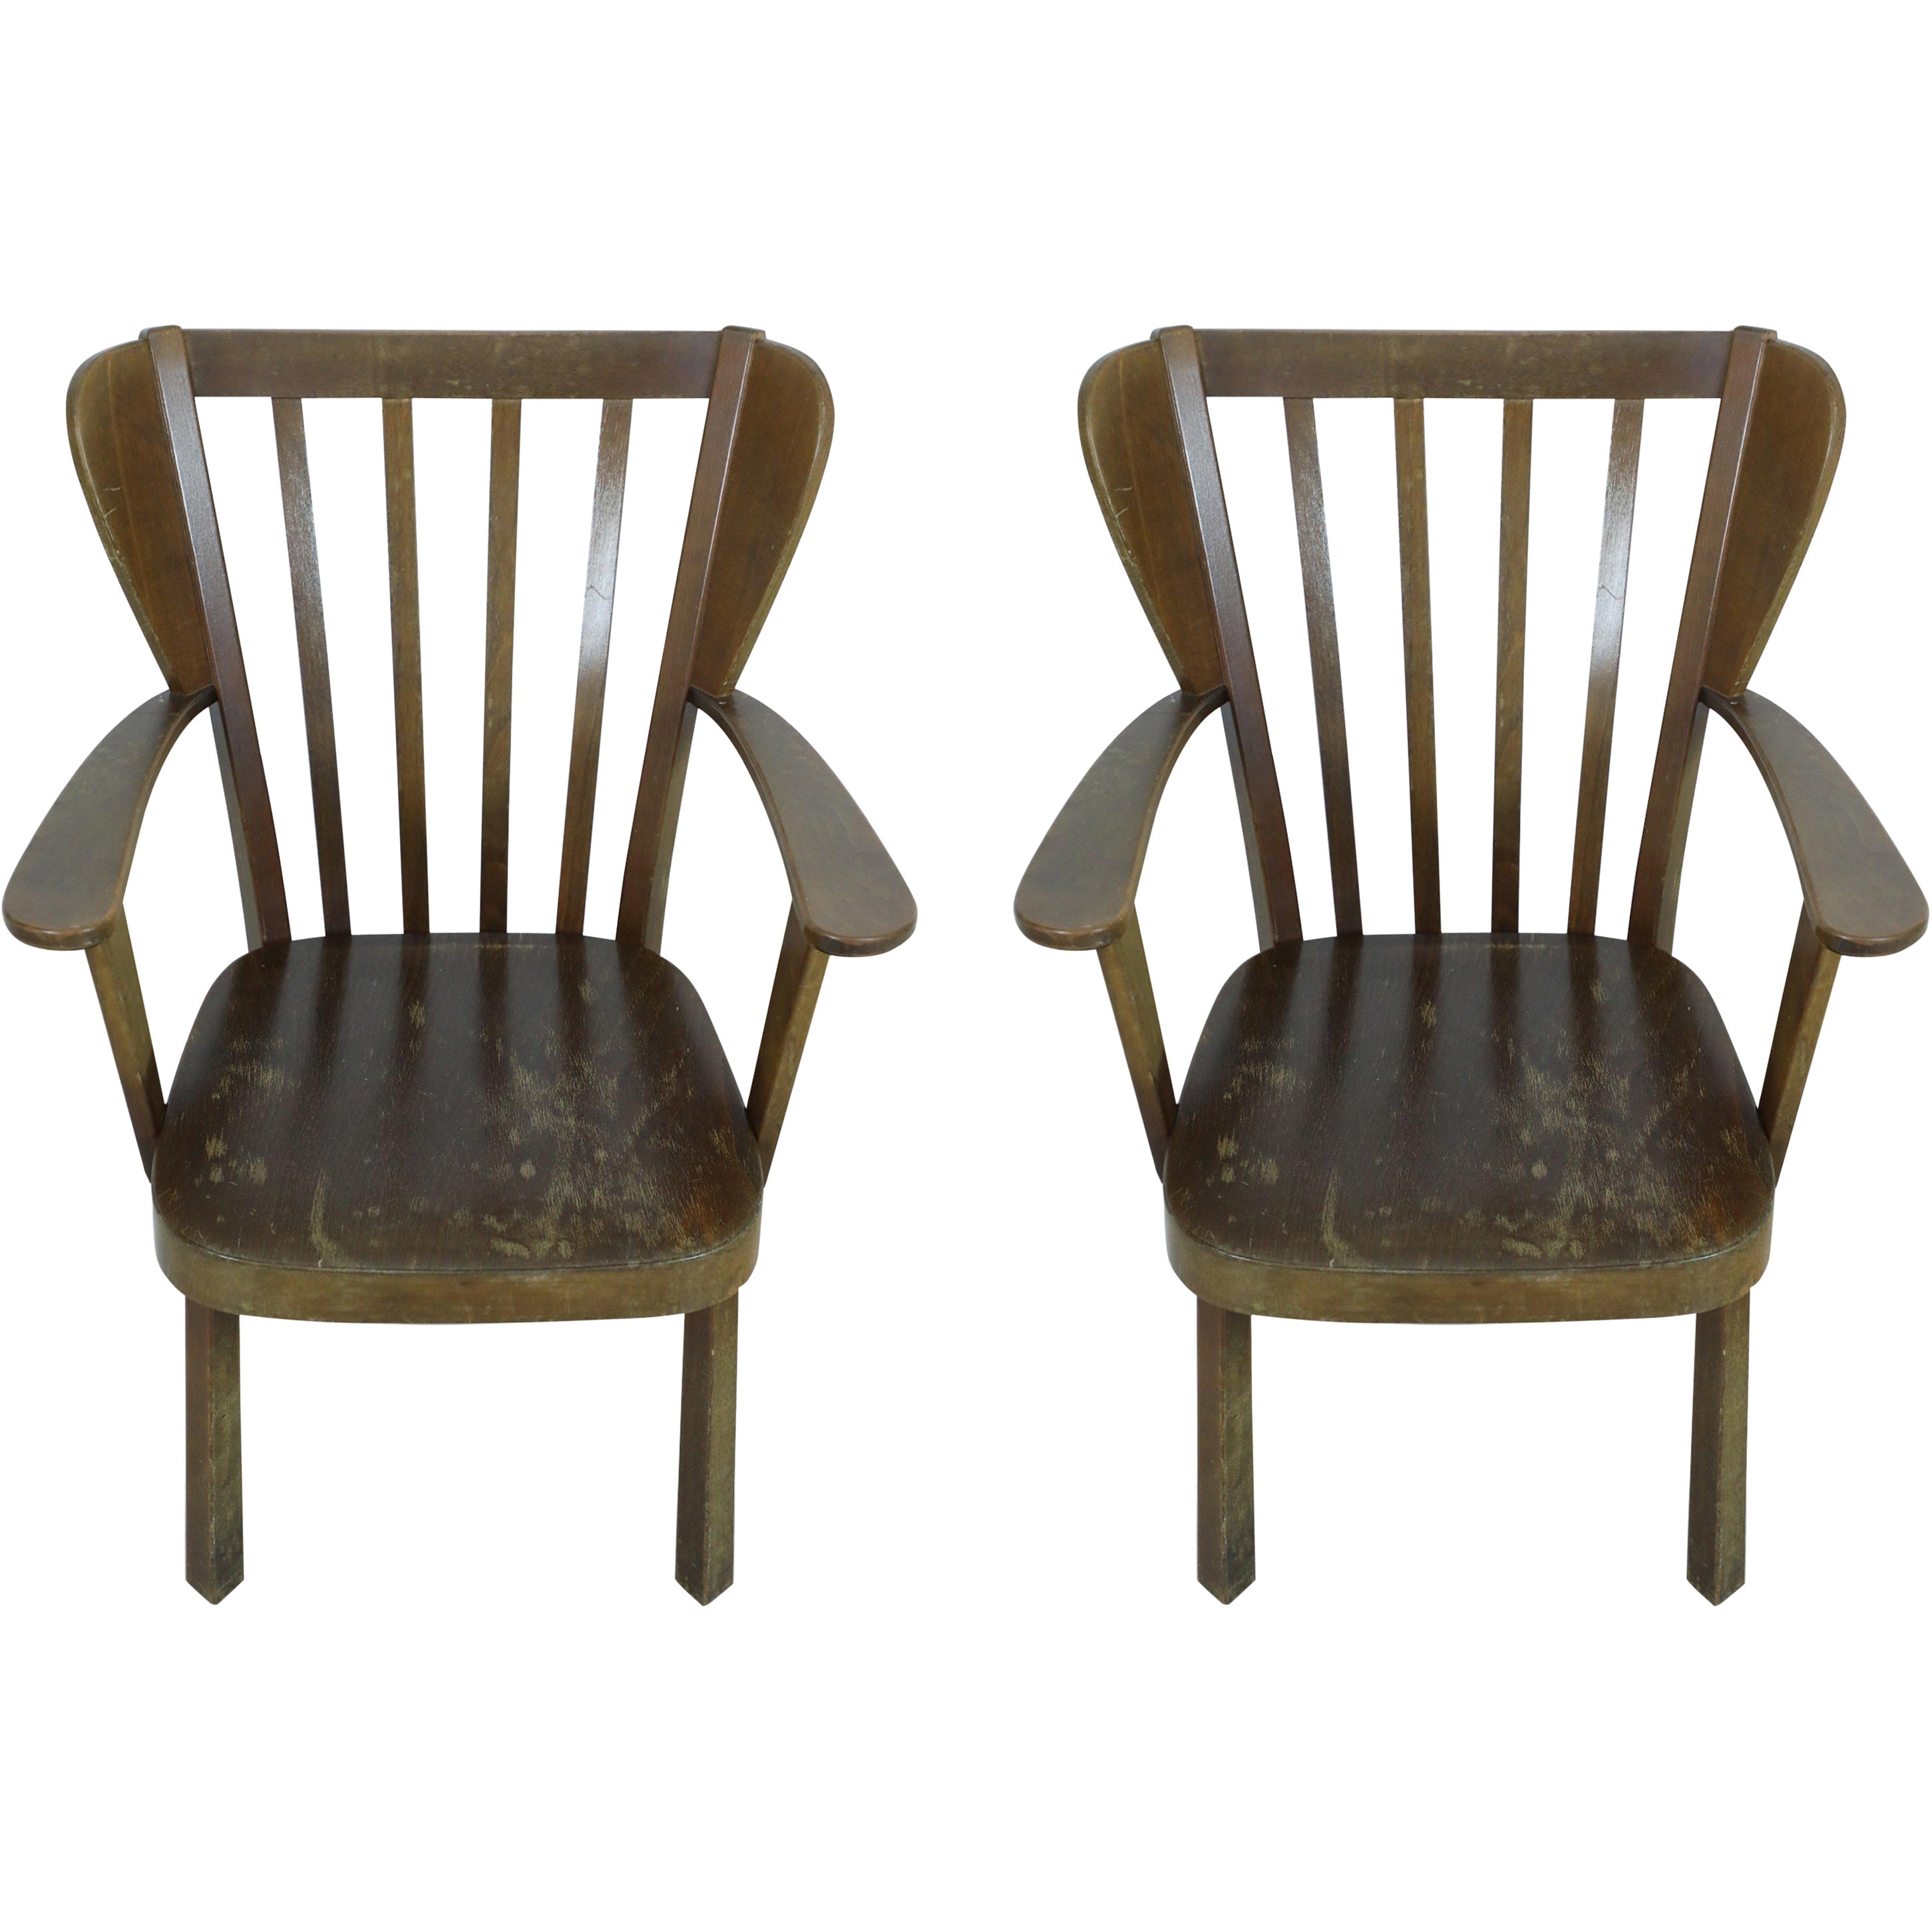 Pair of Danish Mission-Style Oak Slat Back Wing Armchairs